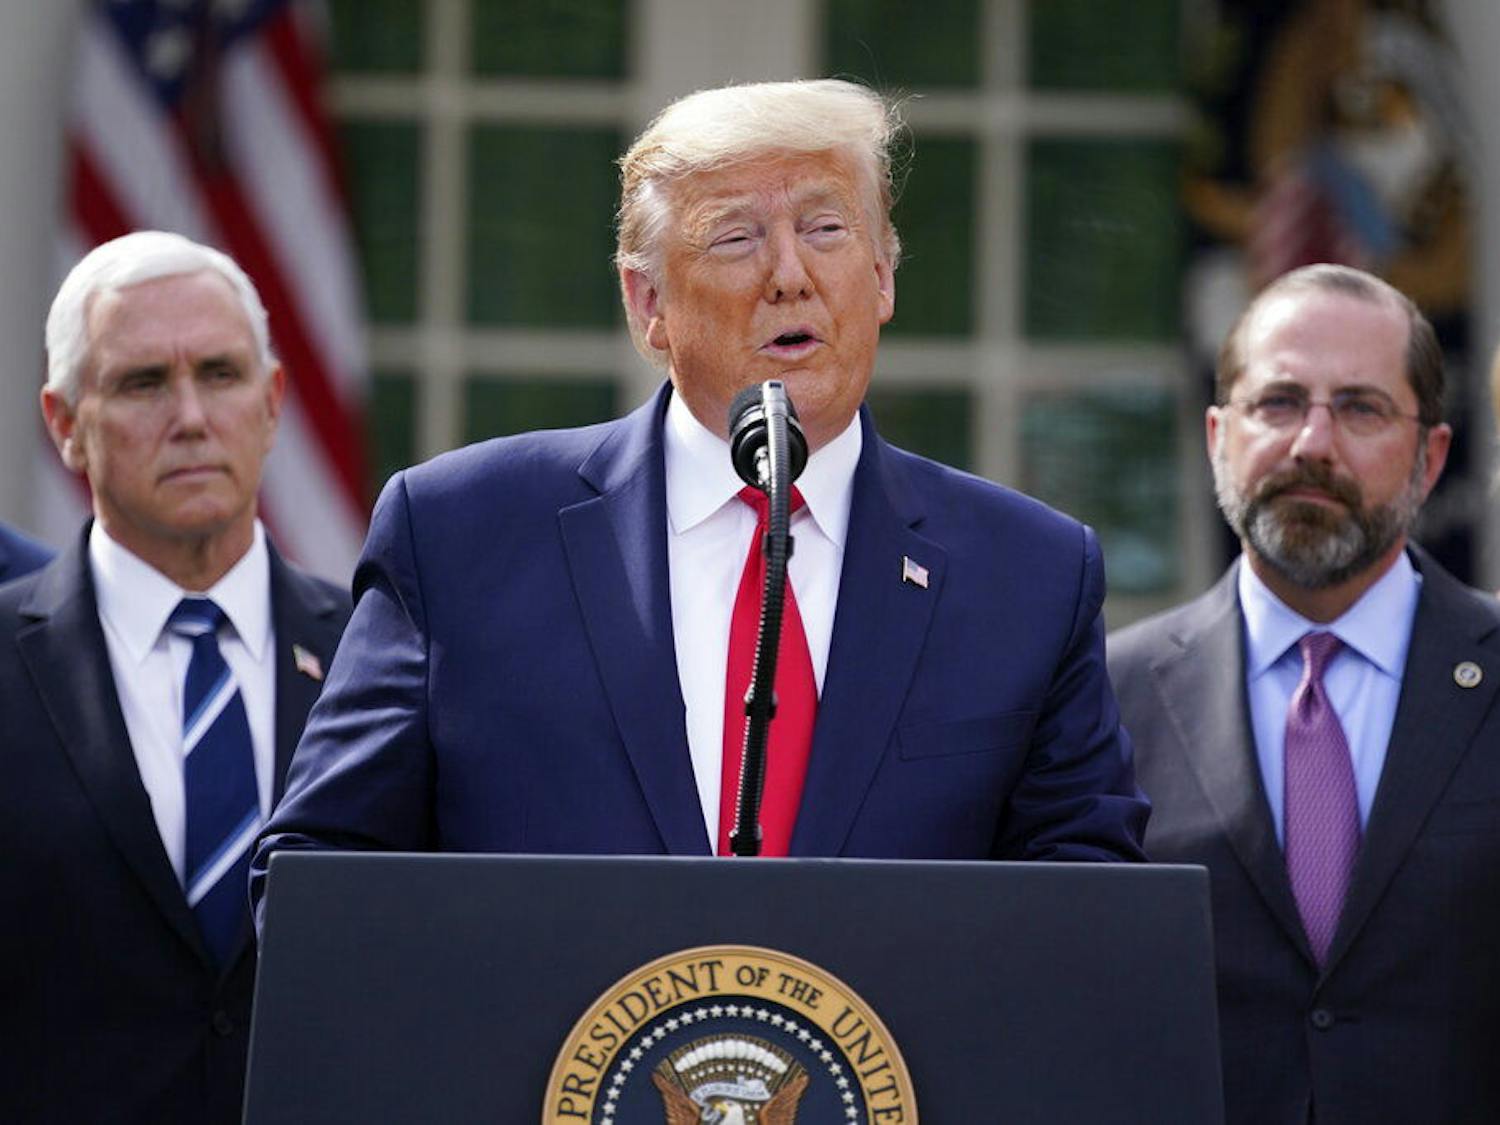 President Donald Trump speaks during a news conference about the coronavirus in the Rose Garden of the White House, Friday, March 13, 2020, in Washington. (AP Photo/Evan Vucci)